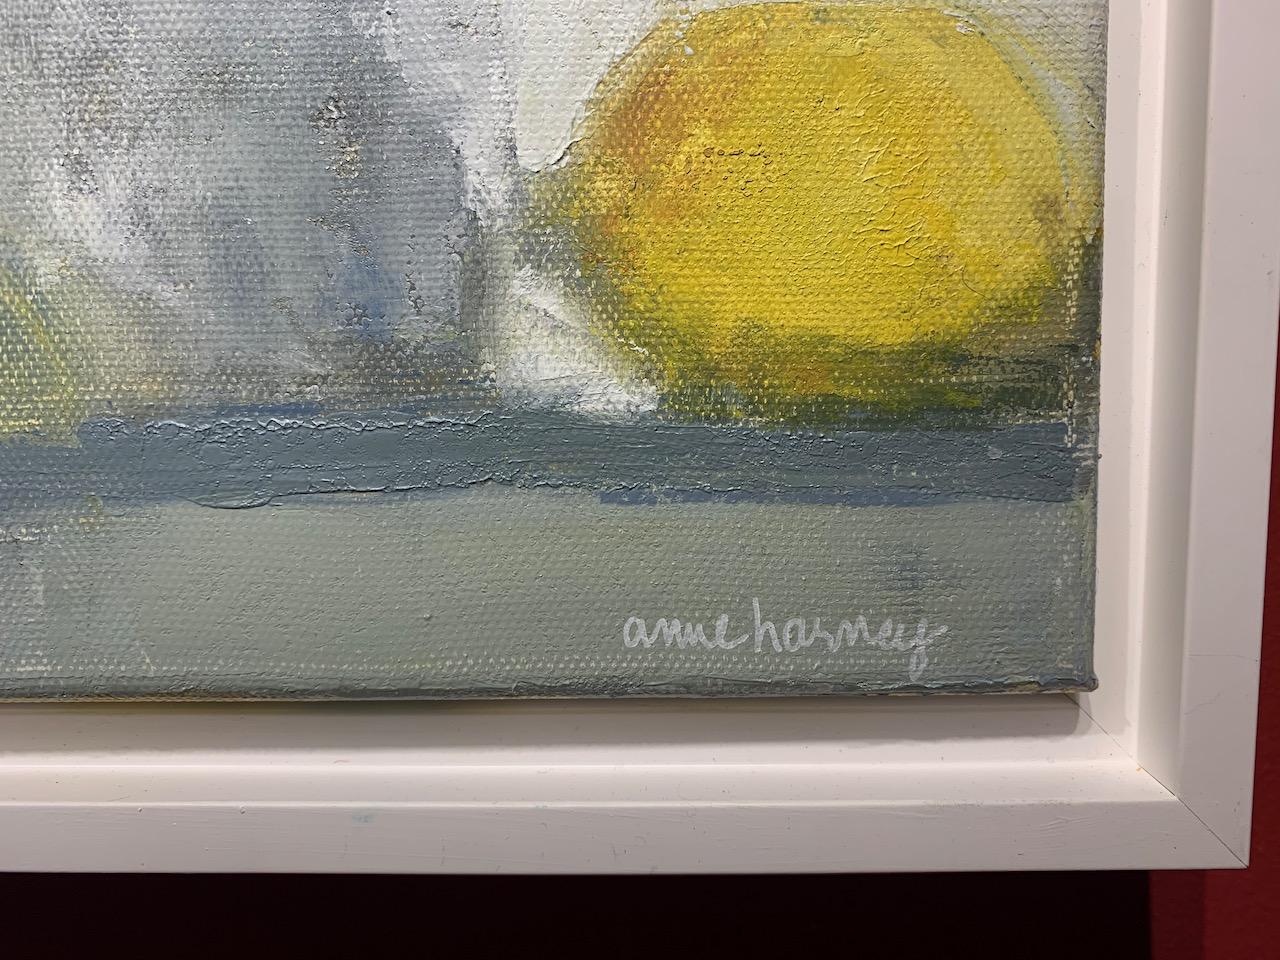 “Never taking anything for granted, I am so grateful to be able to paint every day.”

Anne Harney is a representational painter beginning her work from observation and concluding with a mix of imagination. “I prefer to begin my work from life. My